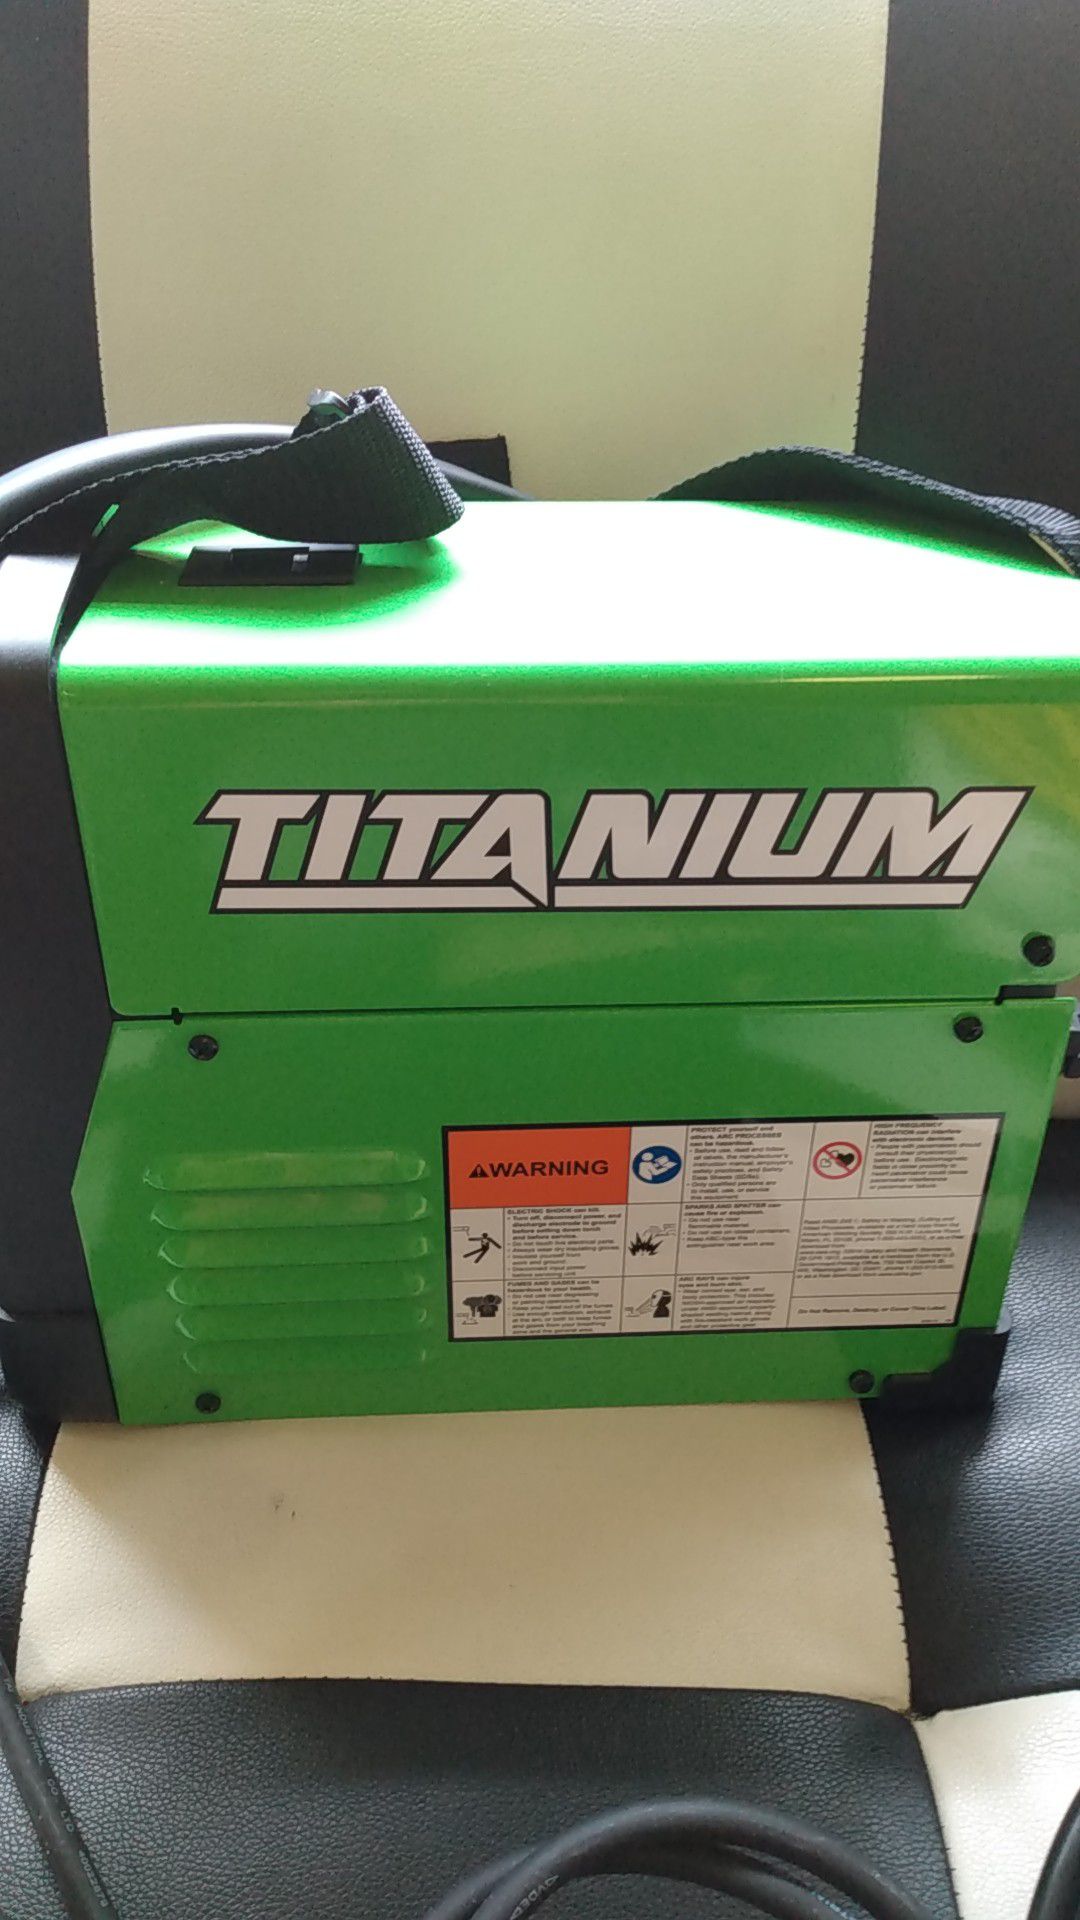 Titanium 125 wire feed welder brand new never been used with state of the art welders helmet also new 250.00i will post pictures later